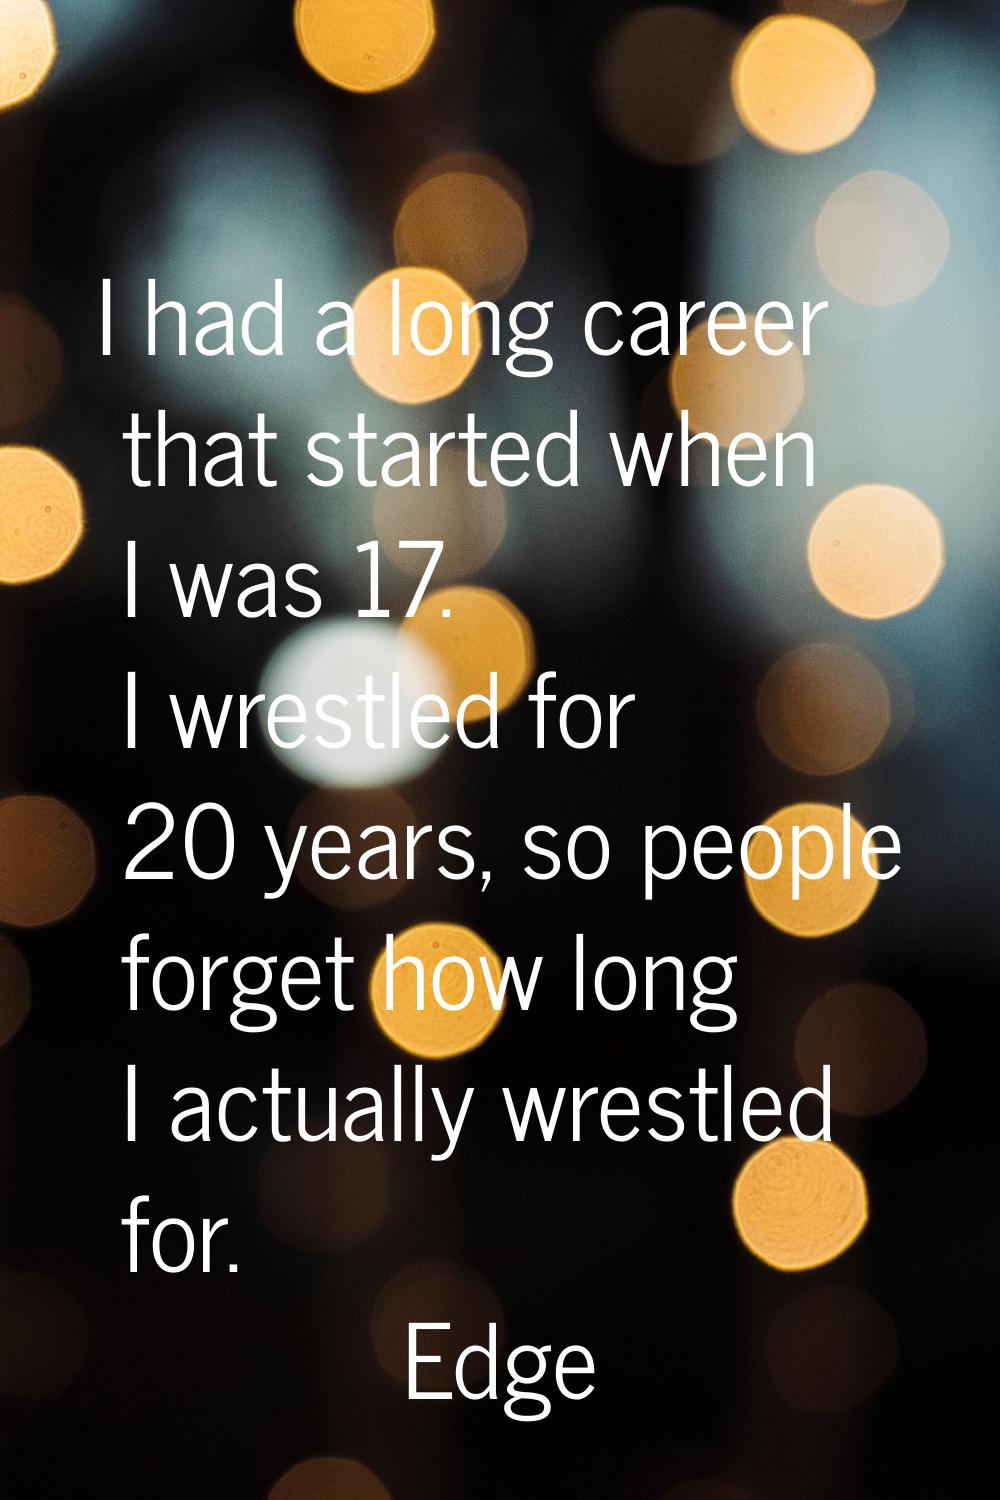 I had a long career that started when I was 17. I wrestled for 20 years, so people forget how long 